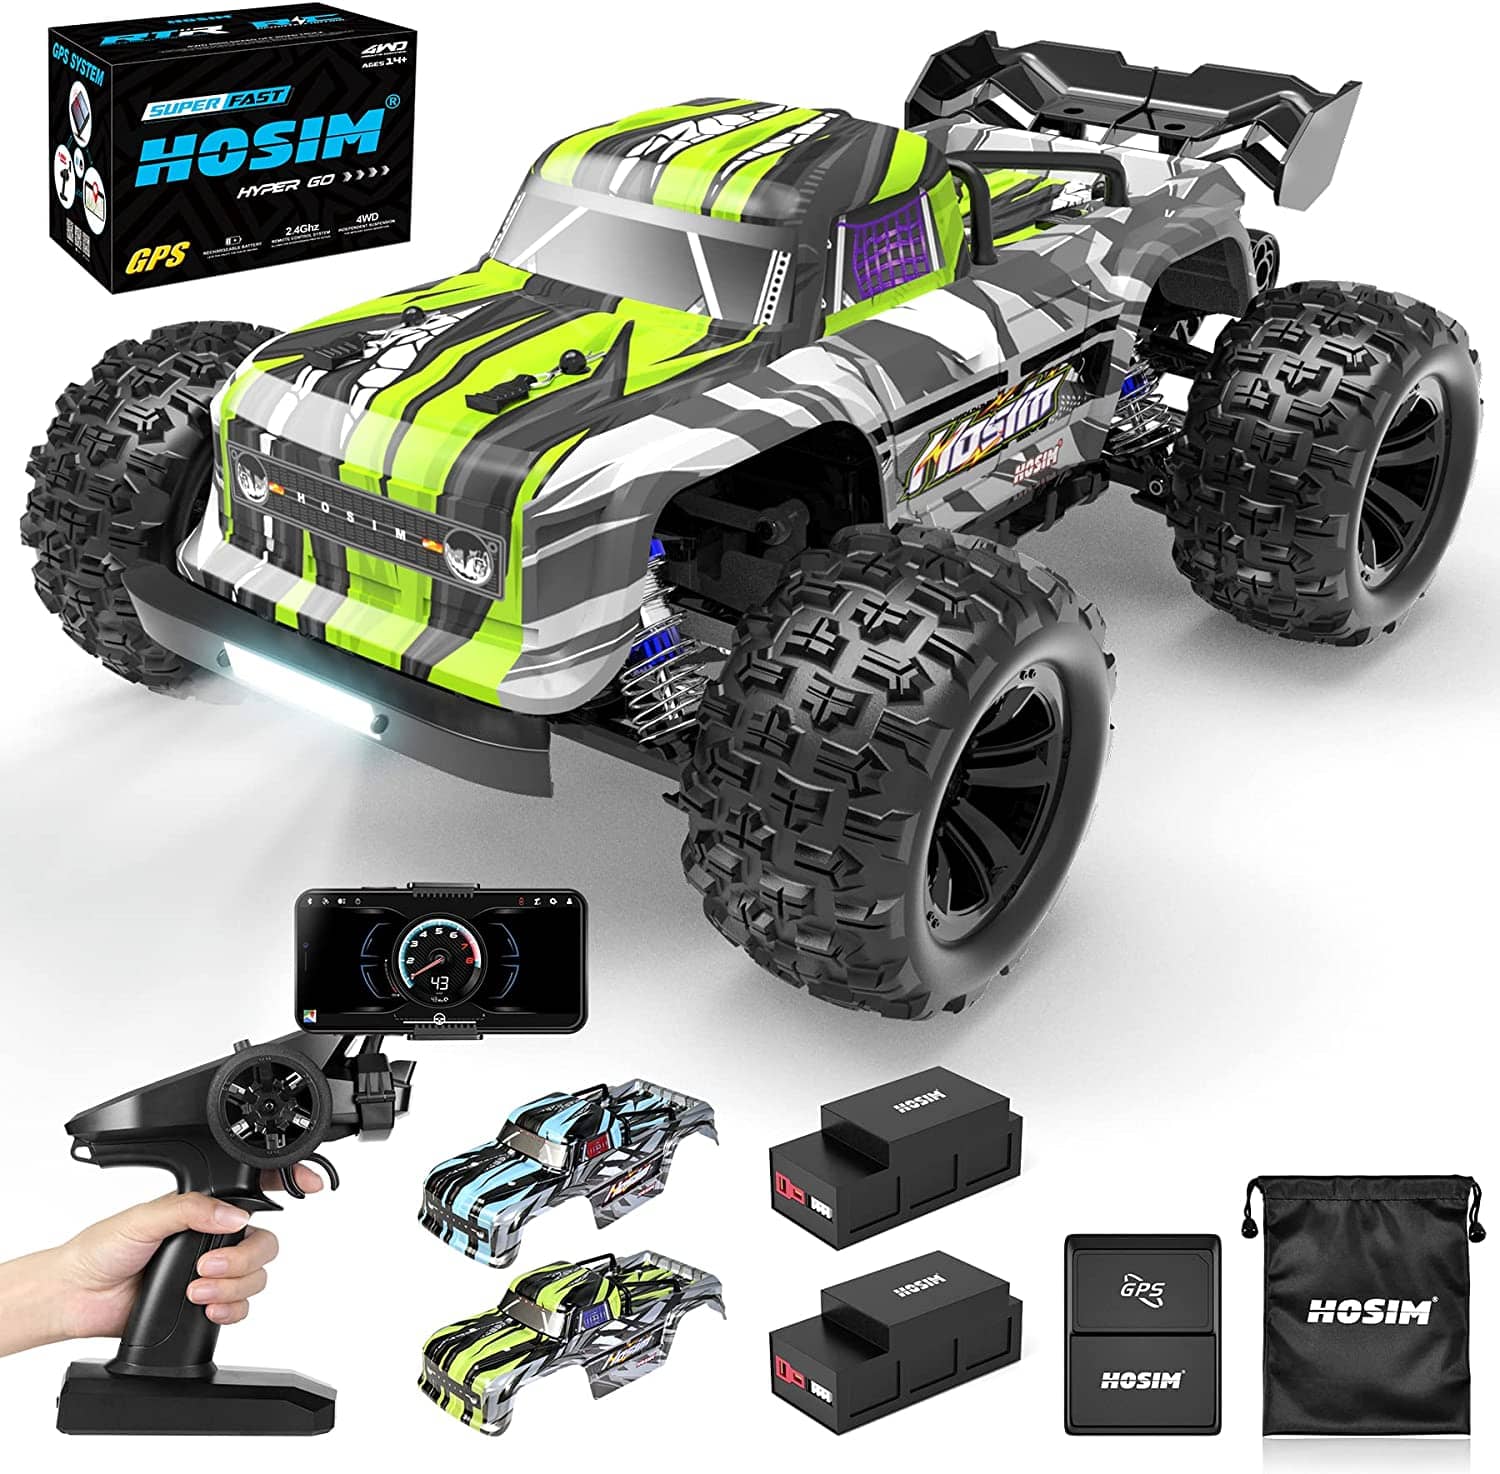 Hosim Bluetooth GPS RC Car 1:16 4WD All Terrain RTR Remote Control Truck with App，Radio Cars Off Road Waterproof Hobby Grade Trucks for Child Adults